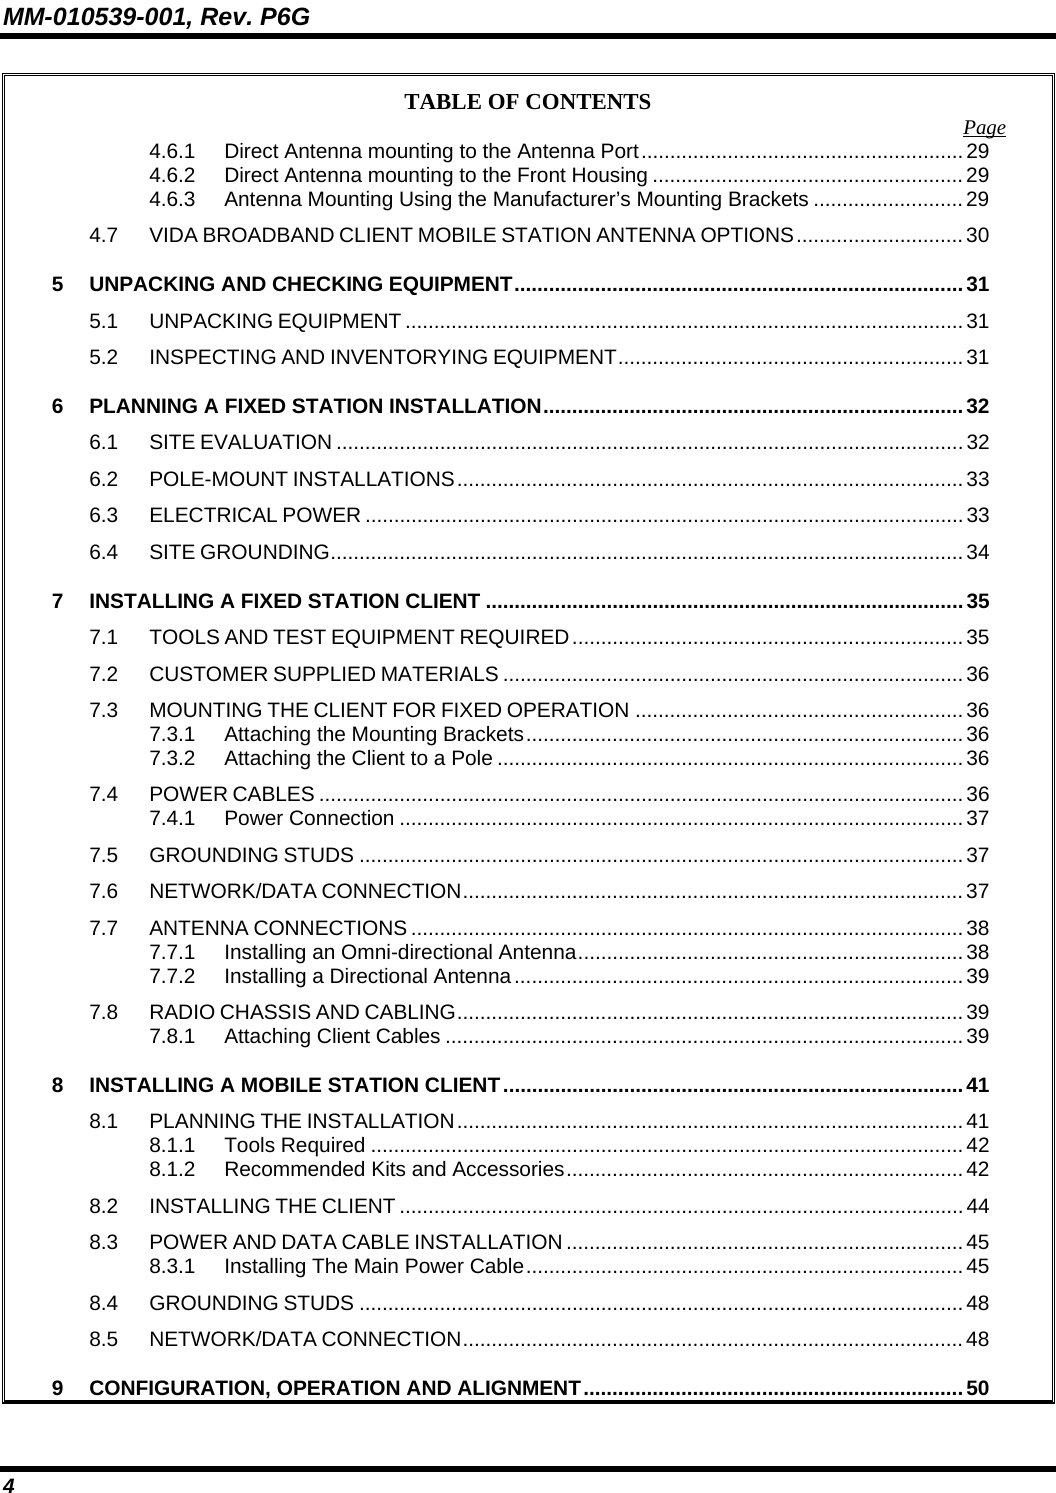 MM-010539-001, Rev. P6G 4 TABLE OF CONTENTS  Page 4.6.1 Direct Antenna mounting to the Antenna Port........................................................ 29 4.6.2 Direct Antenna mounting to the Front Housing ......................................................29 4.6.3 Antenna Mounting Using the Manufacturer’s Mounting Brackets .......................... 29 4.7 VIDA BROADBAND CLIENT MOBILE STATION ANTENNA OPTIONS............................. 30 5 UNPACKING AND CHECKING EQUIPMENT..............................................................................31 5.1 UNPACKING EQUIPMENT .................................................................................................31 5.2 INSPECTING AND INVENTORYING EQUIPMENT............................................................ 31 6 PLANNING A FIXED STATION INSTALLATION.........................................................................32 6.1 SITE EVALUATION .............................................................................................................32 6.2 POLE-MOUNT INSTALLATIONS........................................................................................ 33 6.3 ELECTRICAL POWER ........................................................................................................33 6.4 SITE GROUNDING.............................................................................................................. 34 7 INSTALLING A FIXED STATION CLIENT ...................................................................................35 7.1 TOOLS AND TEST EQUIPMENT REQUIRED....................................................................35 7.2 CUSTOMER SUPPLIED MATERIALS ................................................................................36 7.3 MOUNTING THE CLIENT FOR FIXED OPERATION .........................................................36 7.3.1 Attaching the Mounting Brackets............................................................................ 36 7.3.2 Attaching the Client to a Pole .................................................................................36 7.4 POWER CABLES ................................................................................................................36 7.4.1 Power Connection ..................................................................................................37 7.5 GROUNDING STUDS .........................................................................................................37 7.6 NETWORK/DATA CONNECTION....................................................................................... 37 7.7 ANTENNA CONNECTIONS ................................................................................................38 7.7.1 Installing an Omni-directional Antenna................................................................... 38 7.7.2 Installing a Directional Antenna.............................................................................. 39 7.8 RADIO CHASSIS AND CABLING........................................................................................39 7.8.1 Attaching Client Cables ..........................................................................................39 8 INSTALLING A MOBILE STATION CLIENT................................................................................41 8.1 PLANNING THE INSTALLATION........................................................................................ 41 8.1.1 Tools Required ....................................................................................................... 42 8.1.2 Recommended Kits and Accessories..................................................................... 42 8.2 INSTALLING THE CLIENT ..................................................................................................44 8.3 POWER AND DATA CABLE INSTALLATION ..................................................................... 45 8.3.1 Installing The Main Power Cable............................................................................ 45 8.4 GROUNDING STUDS .........................................................................................................48 8.5 NETWORK/DATA CONNECTION....................................................................................... 48 9 CONFIGURATION, OPERATION AND ALIGNMENT..................................................................50 